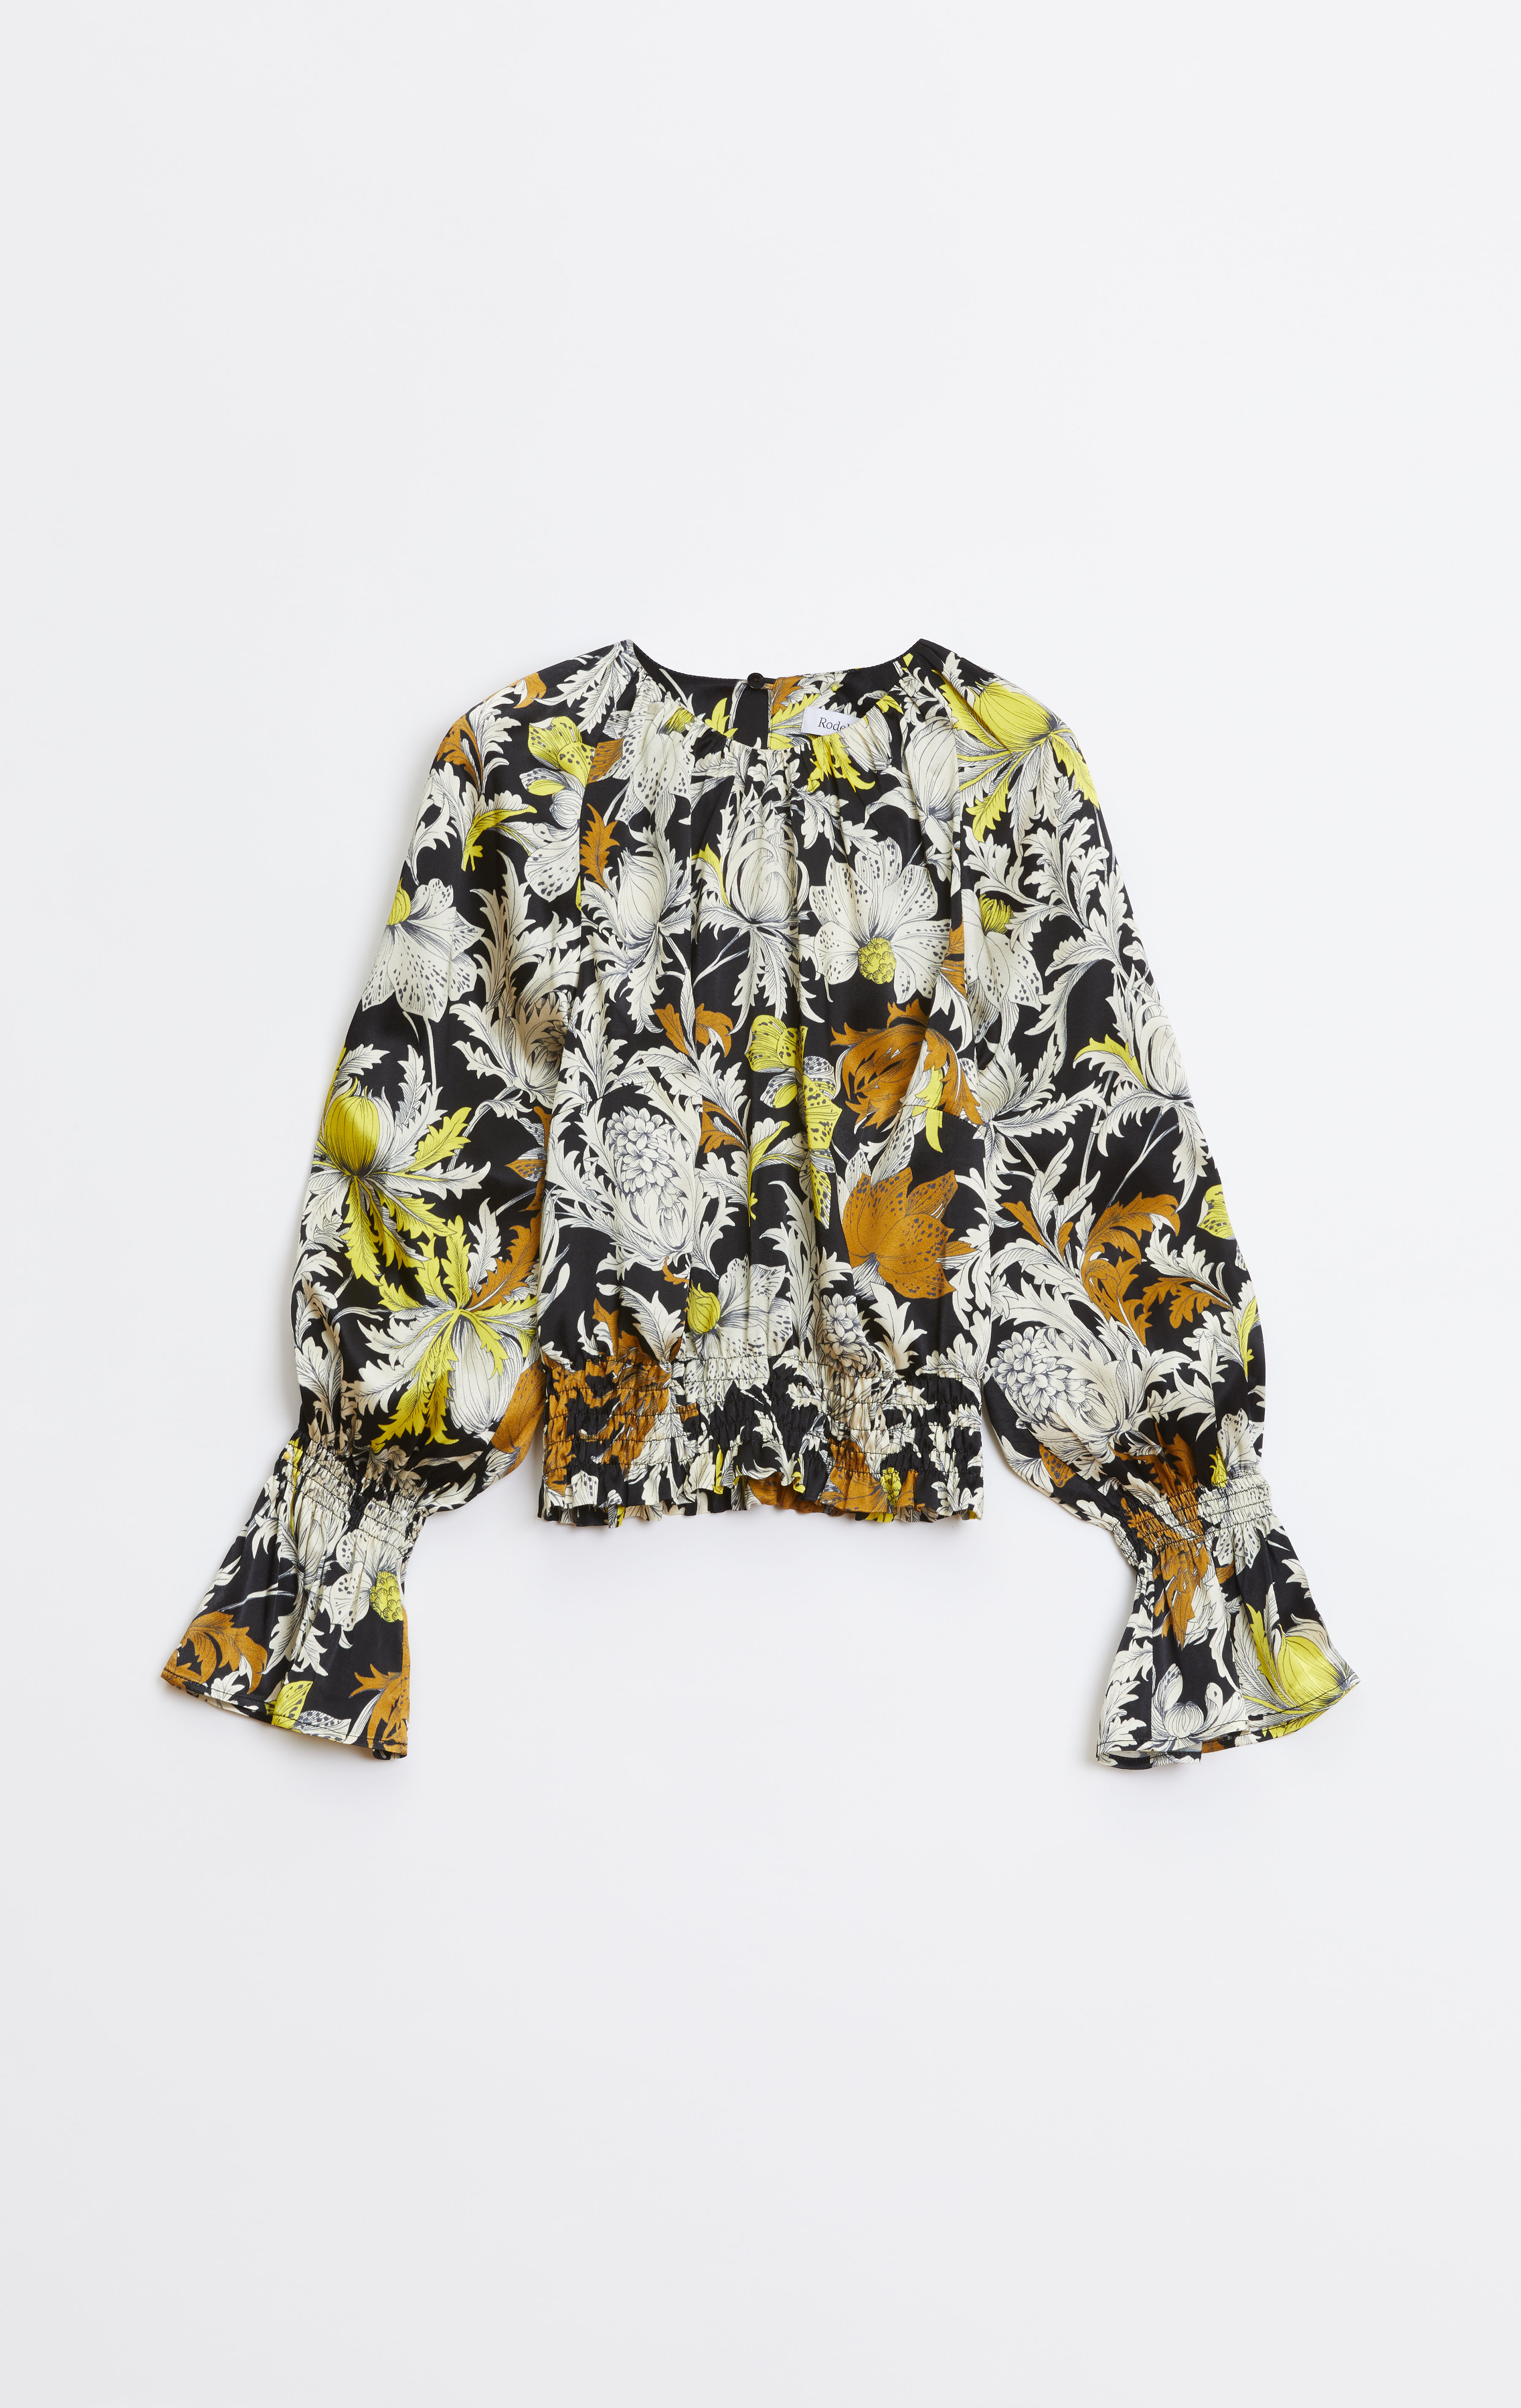 Rodebjer Adania Thistle Blouse